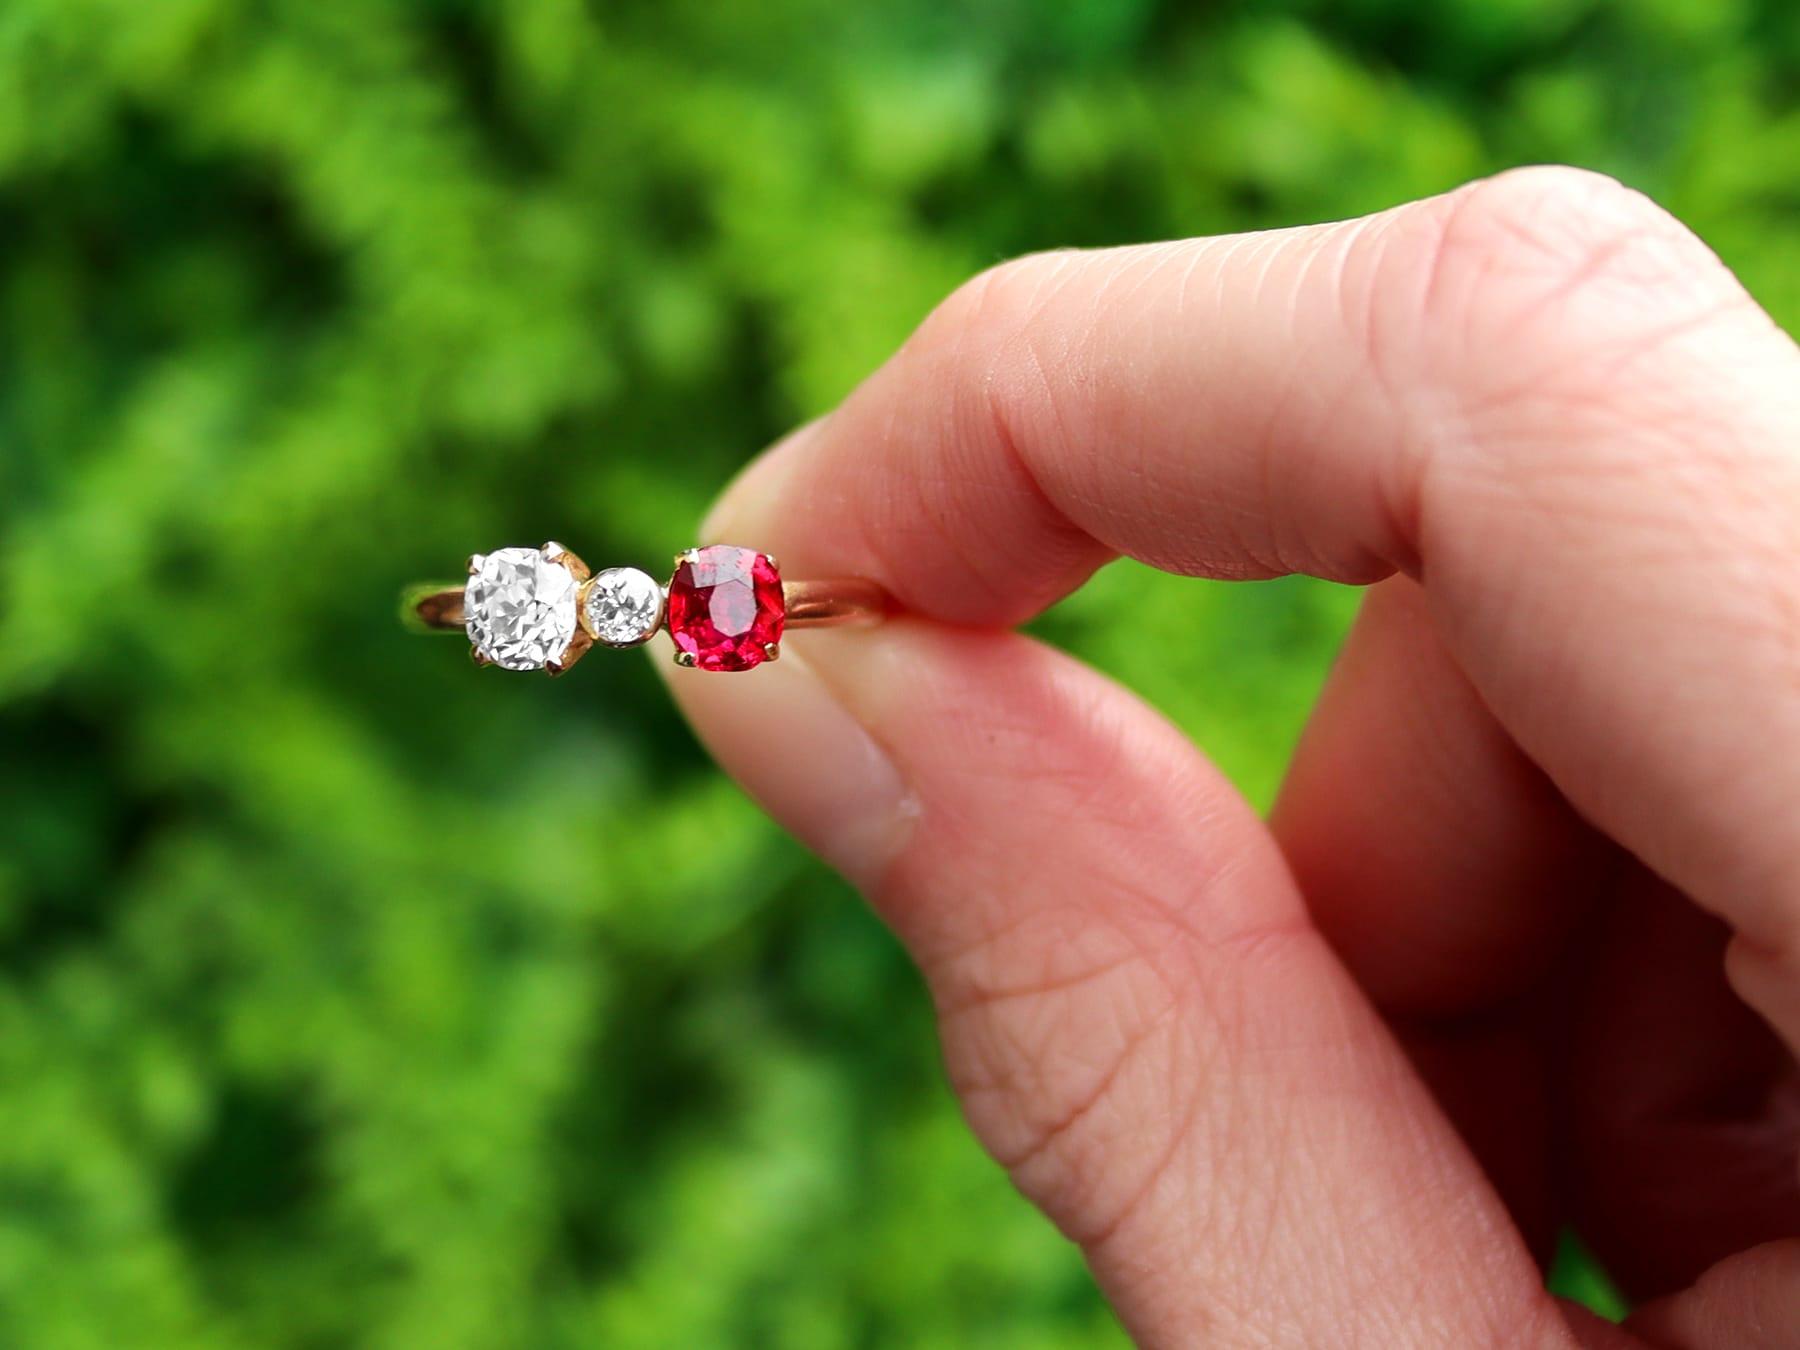 An impressive vintage 1950s 0.64 carat diamond and 0.45 carat ruby, 15 karat yellow gold cocktail ring; part of our diverse antique jewelry collections.

This fine and impressive ruby and diamond ring has been crafted in 15k yellow gold.

The simple